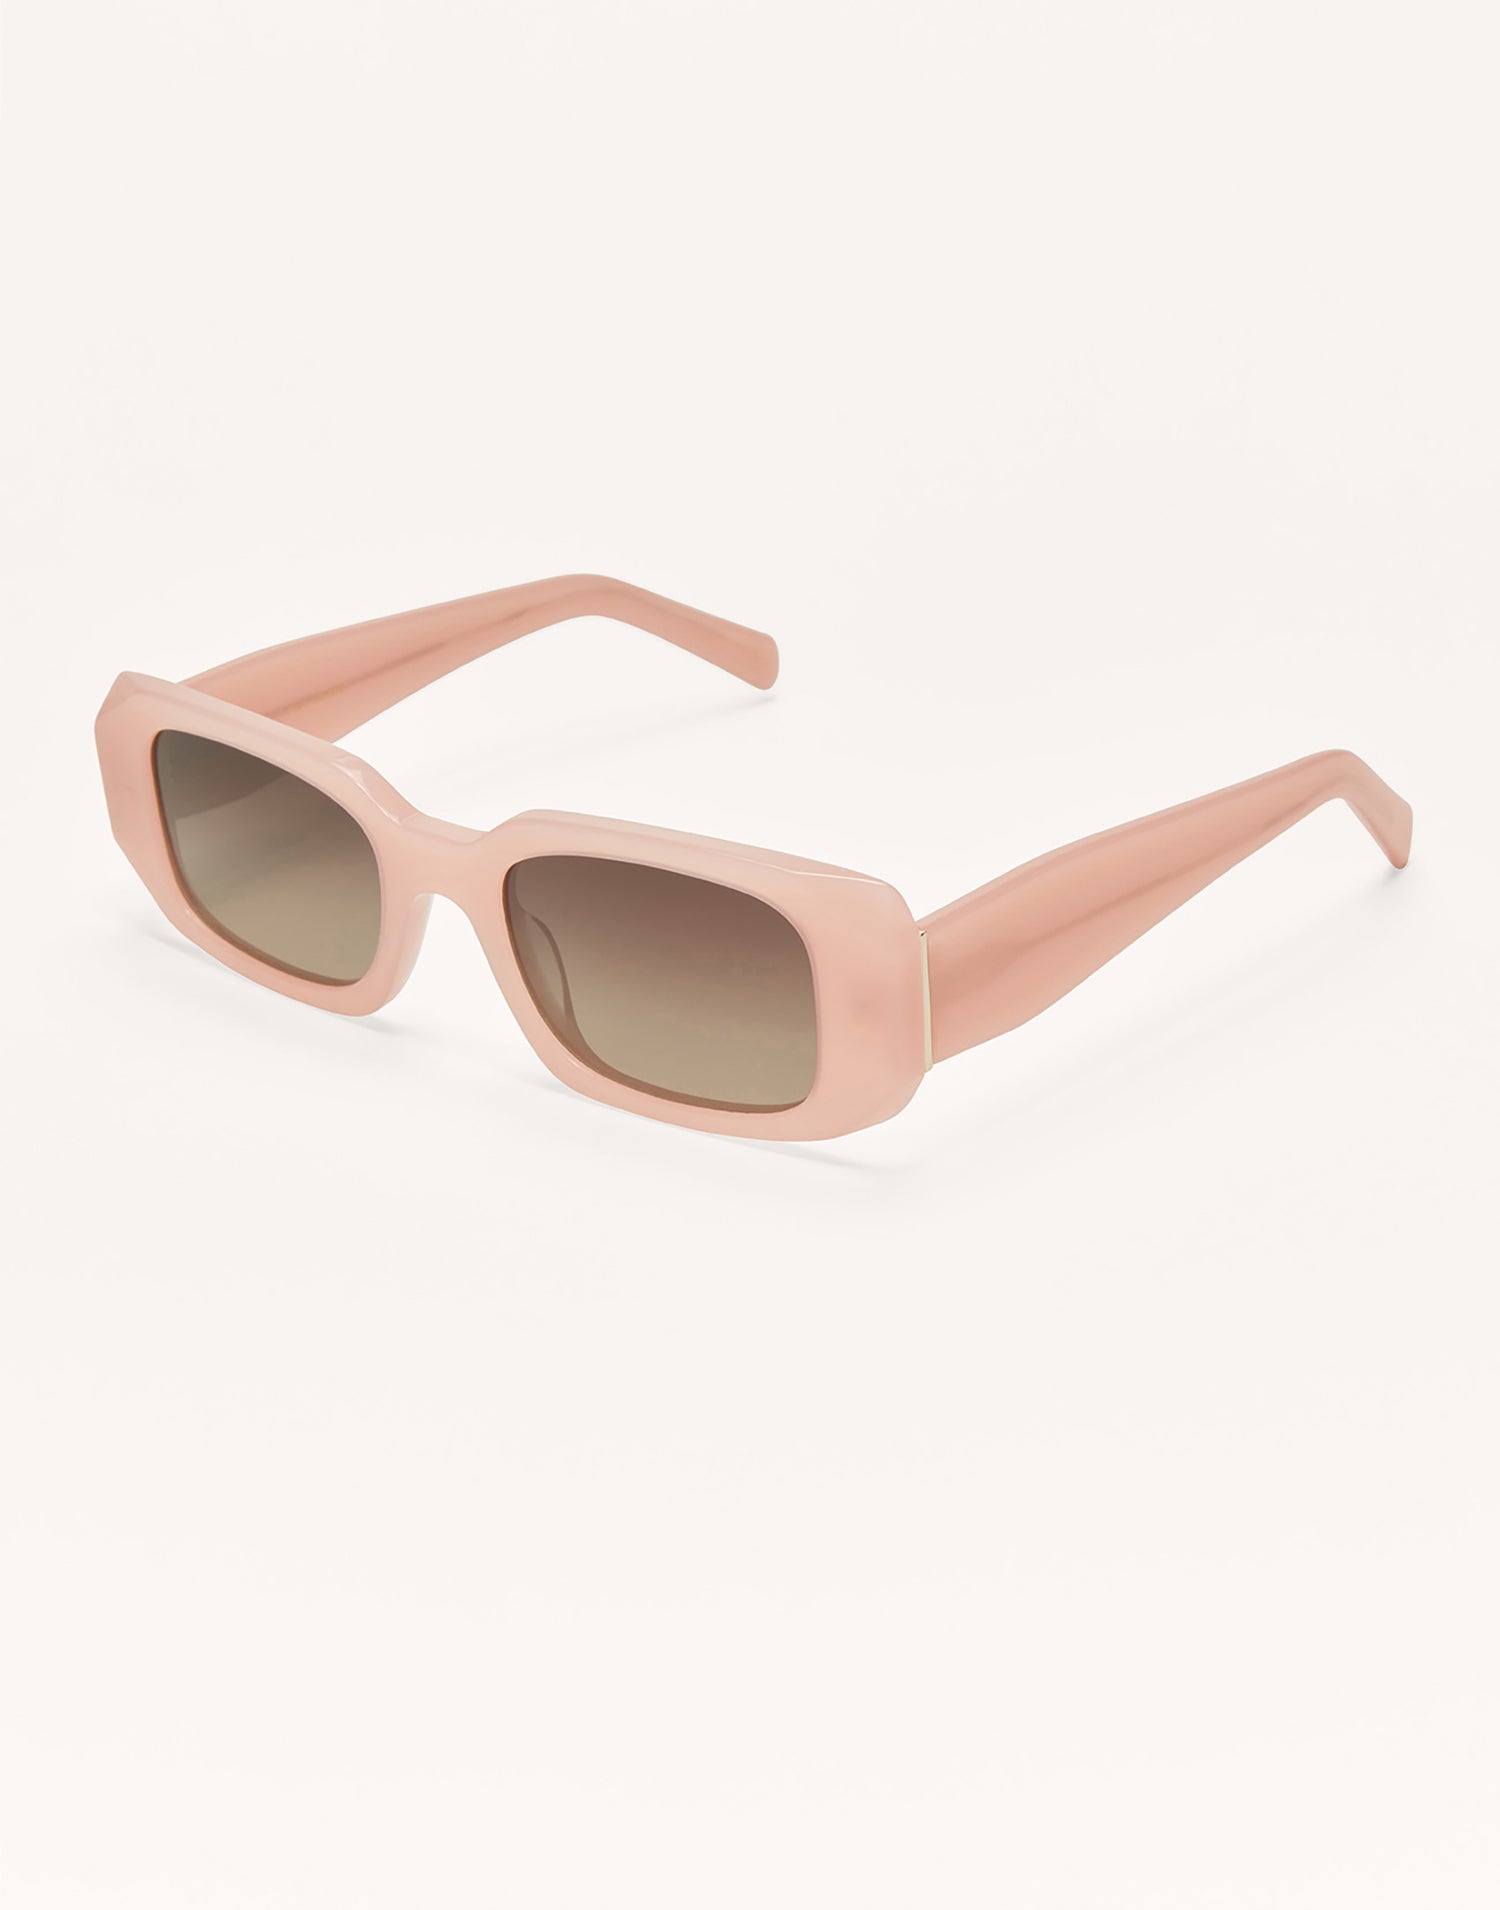 Off Duty Sunglasses by Z Supply in Blush Pink - Angled View